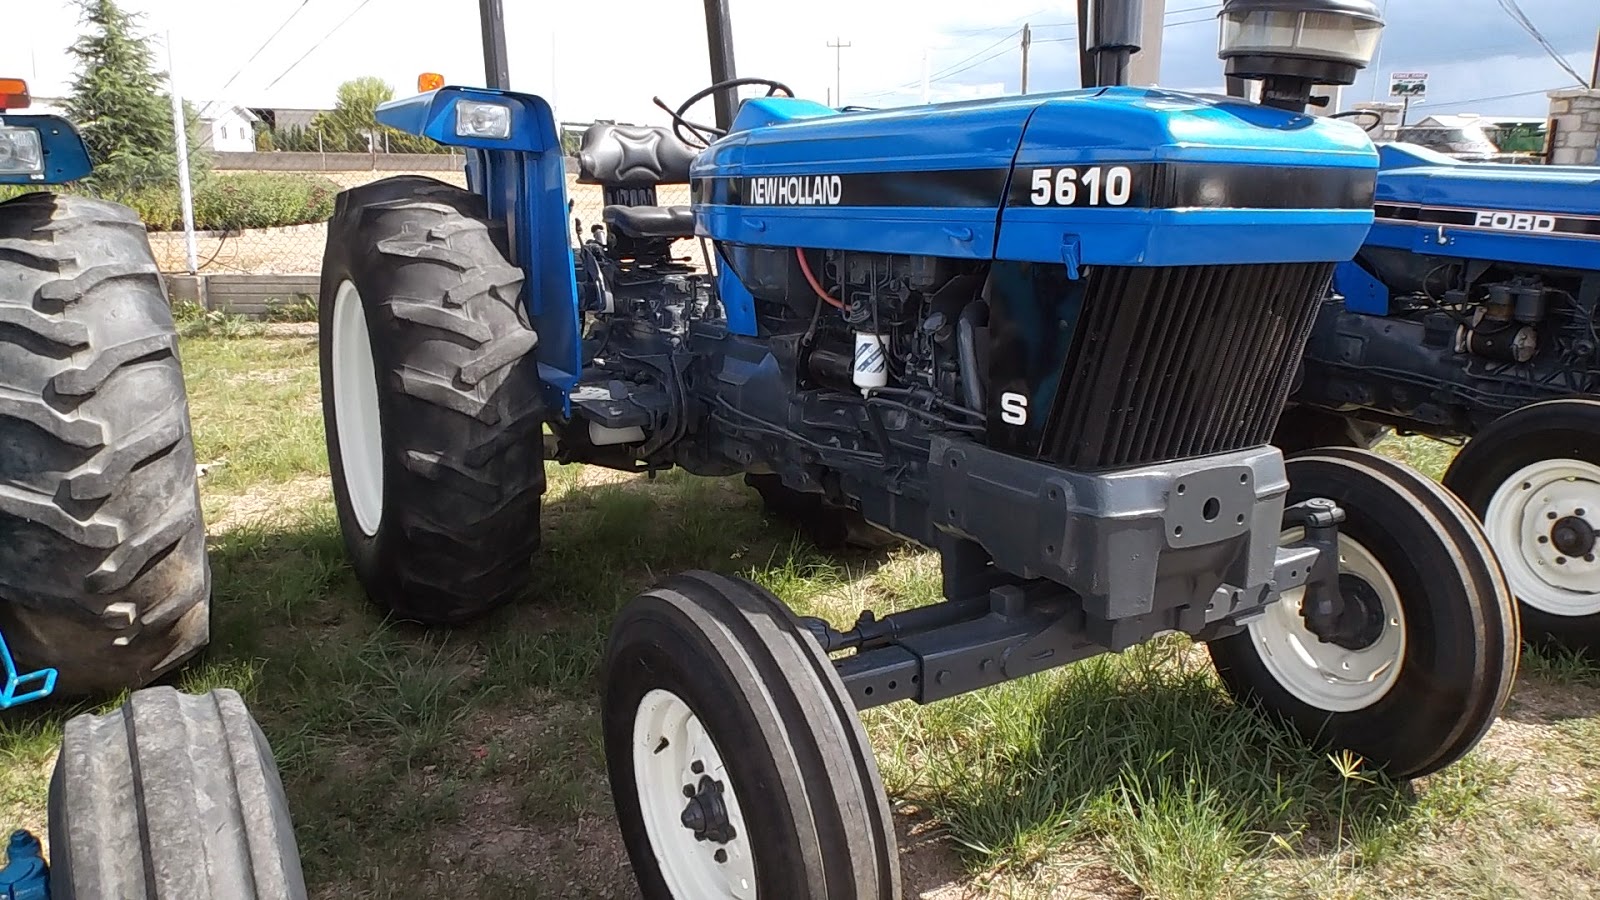 ... INDUSTRIAL: Tractor New Holland 5610S $17,300 Dlls, (flo17400